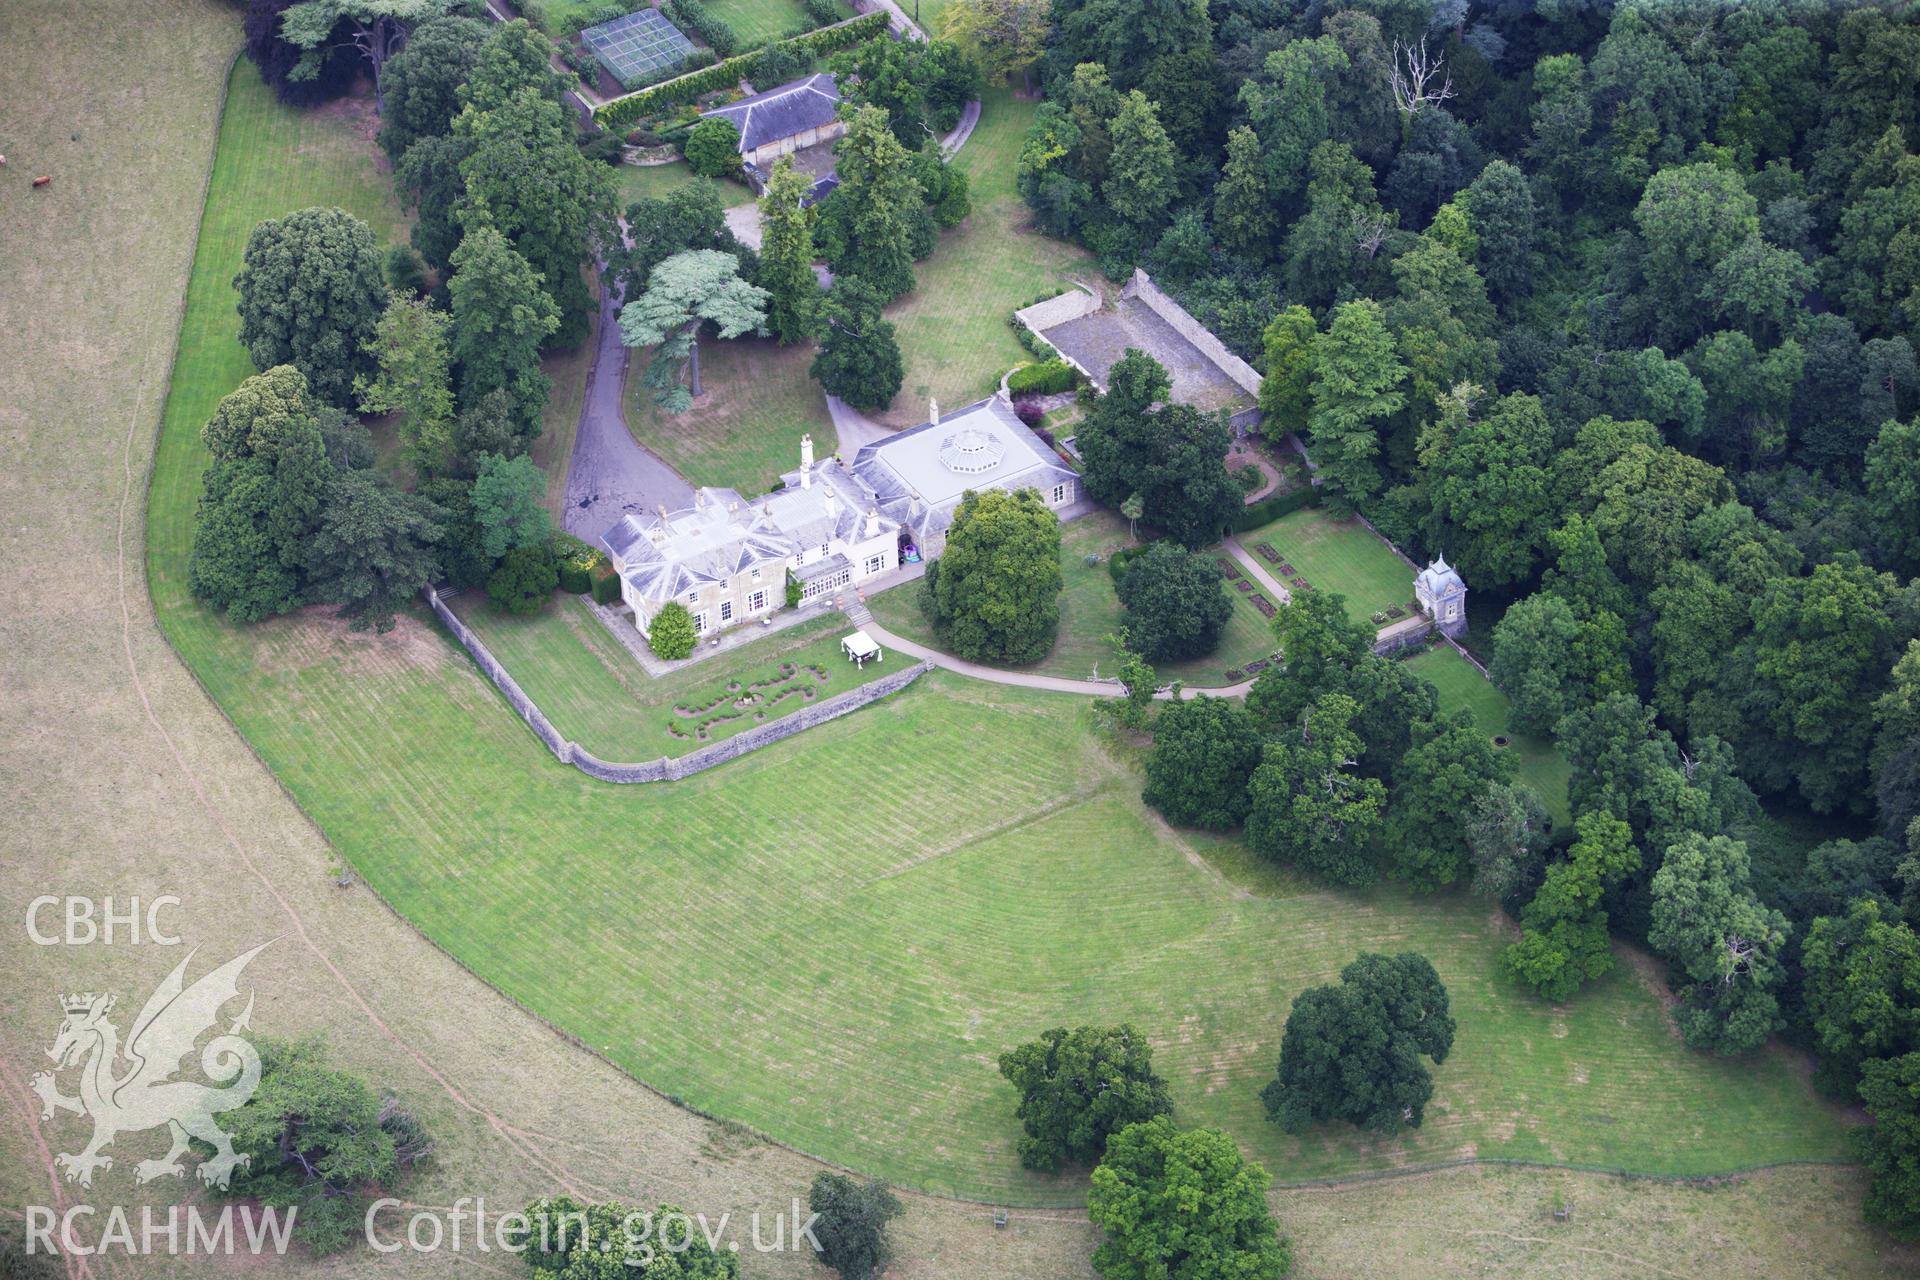 RCAHMW colour oblique aerial photograph of Wyelands House, Mathern, Chepstow. Taken on 09 July 2009 by Toby Driver